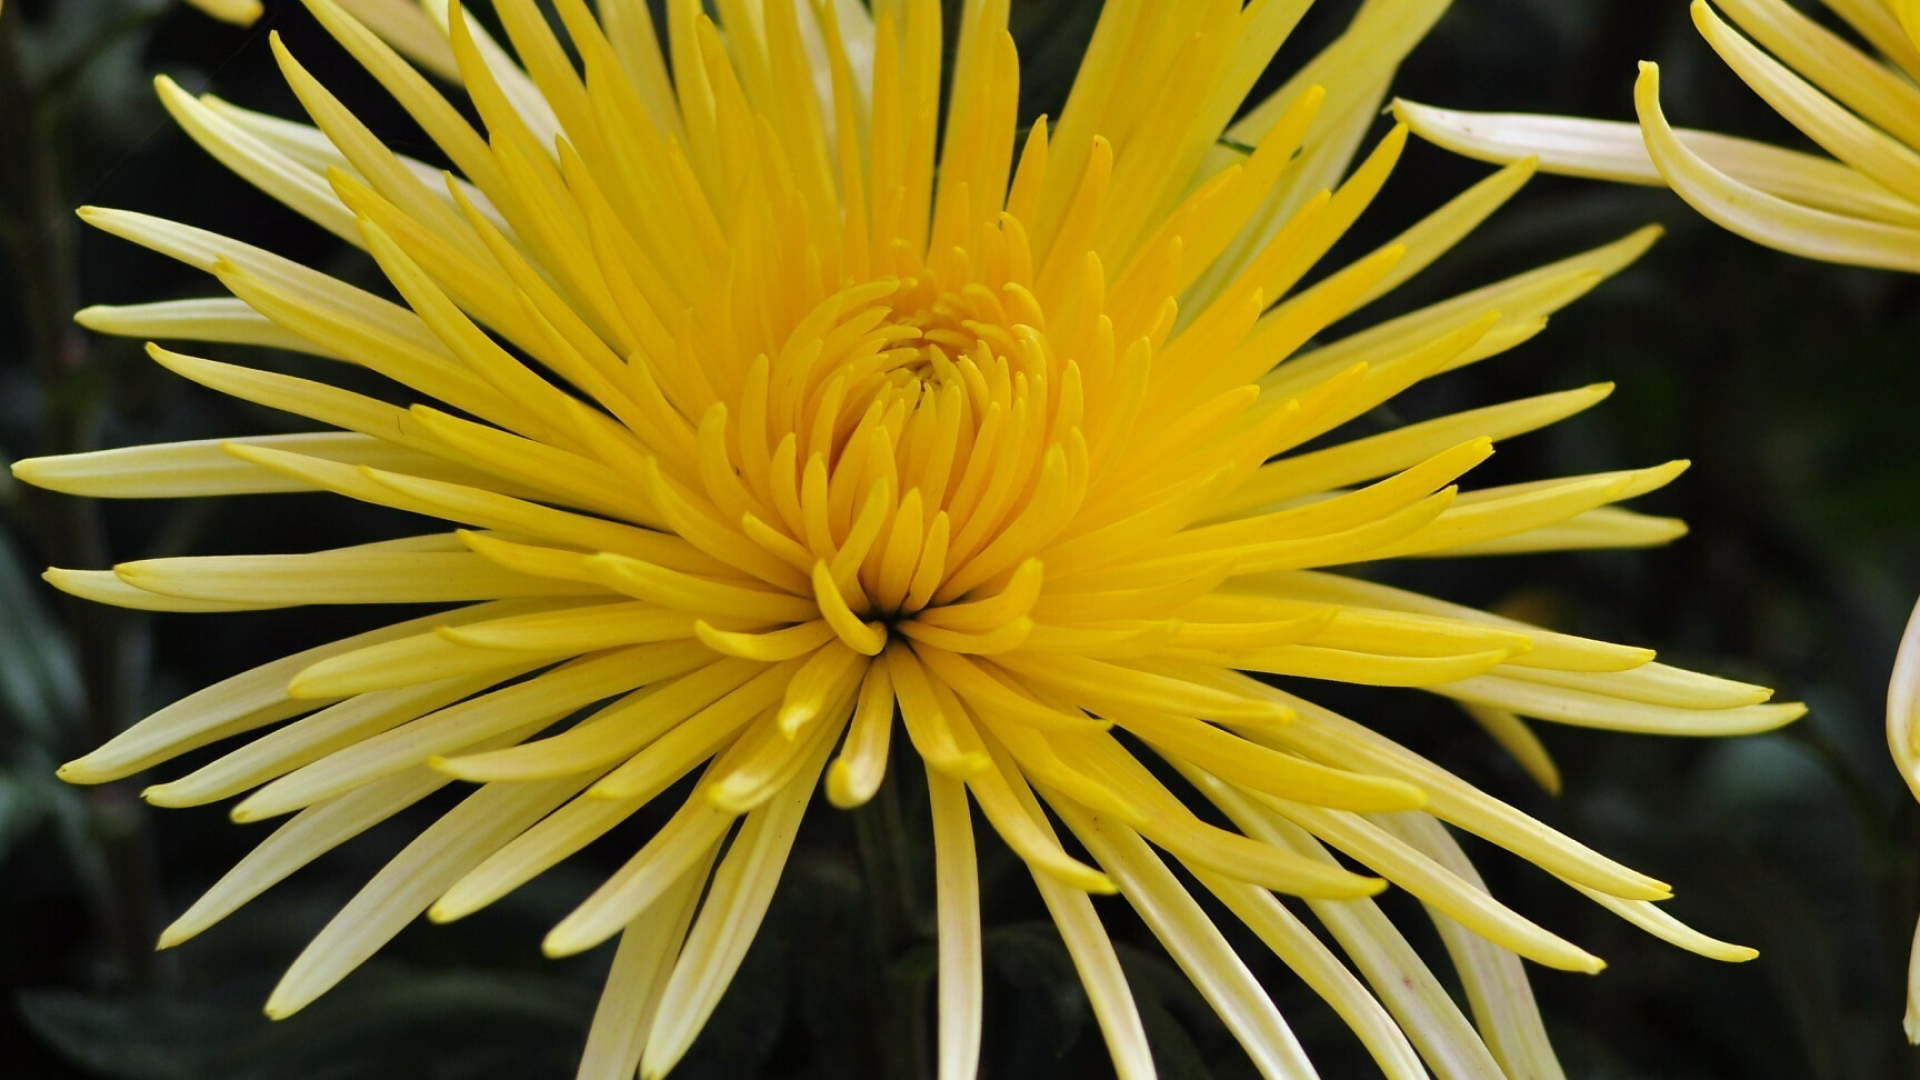 Chrysanthemum: The flowers come in various shapes, sizes and colours, Mums. 1920x1080 Full HD Wallpaper.